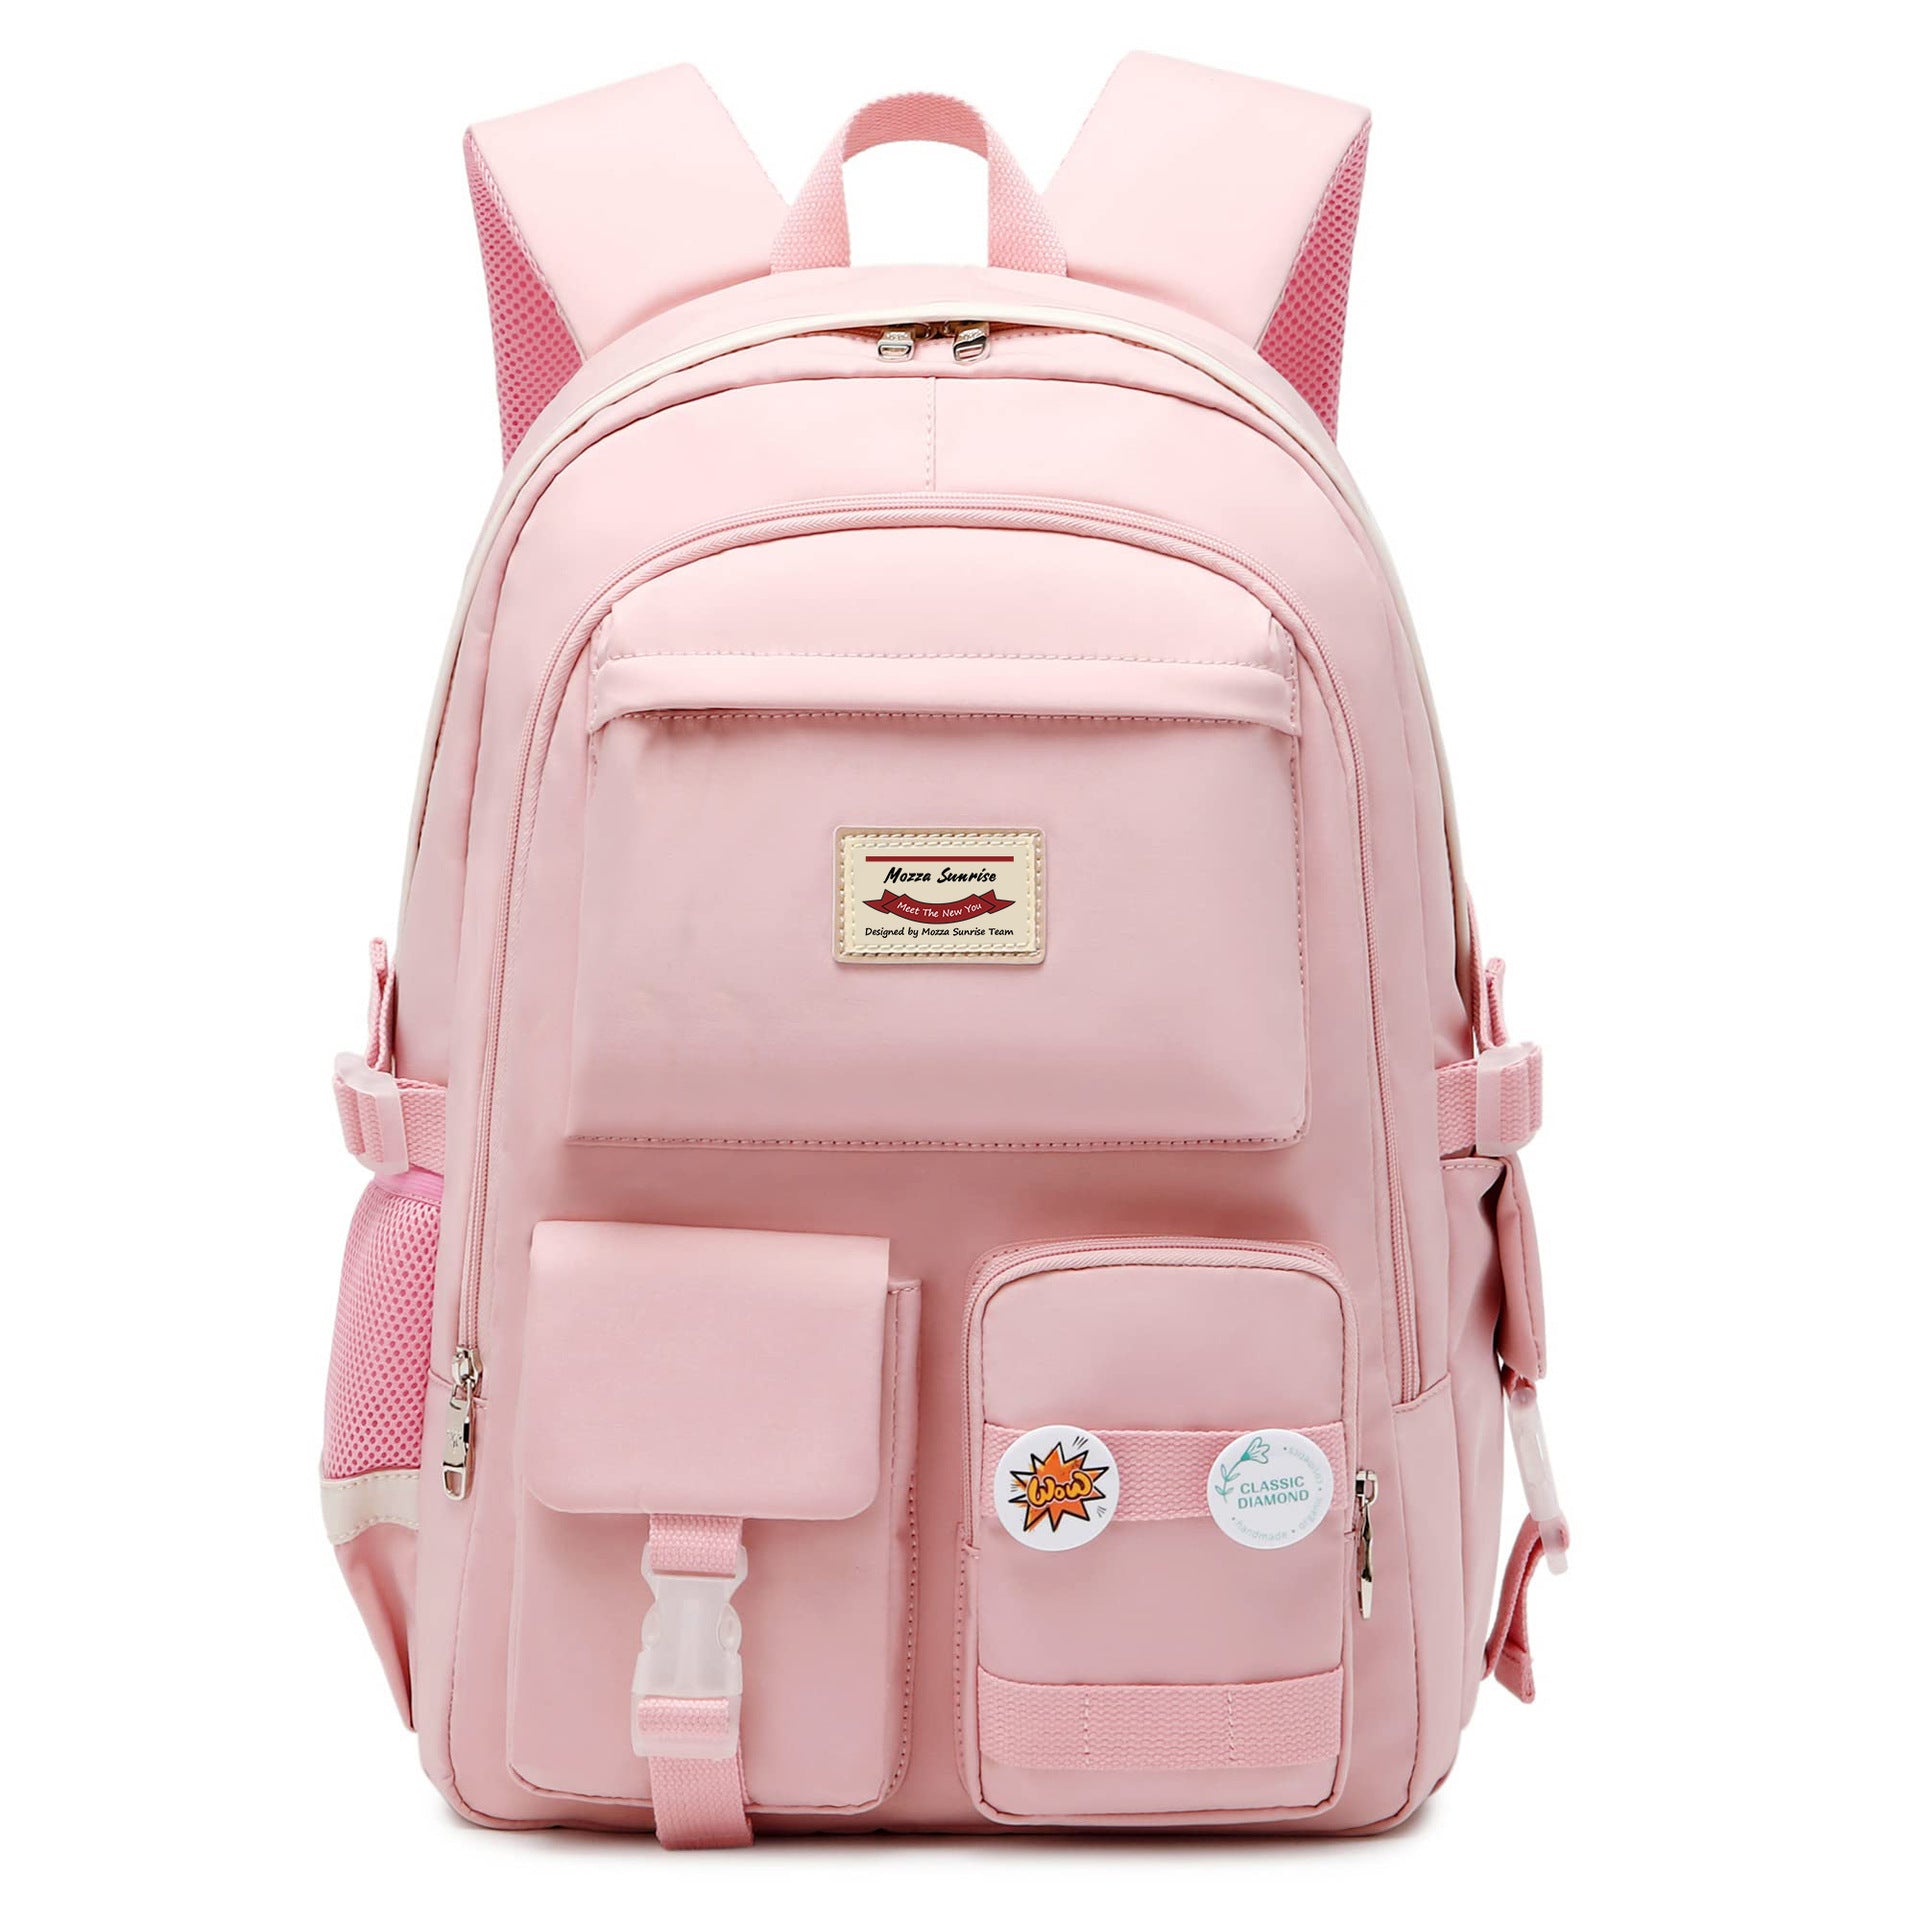 Student Schoolbag Large Capacity Computer Backpack